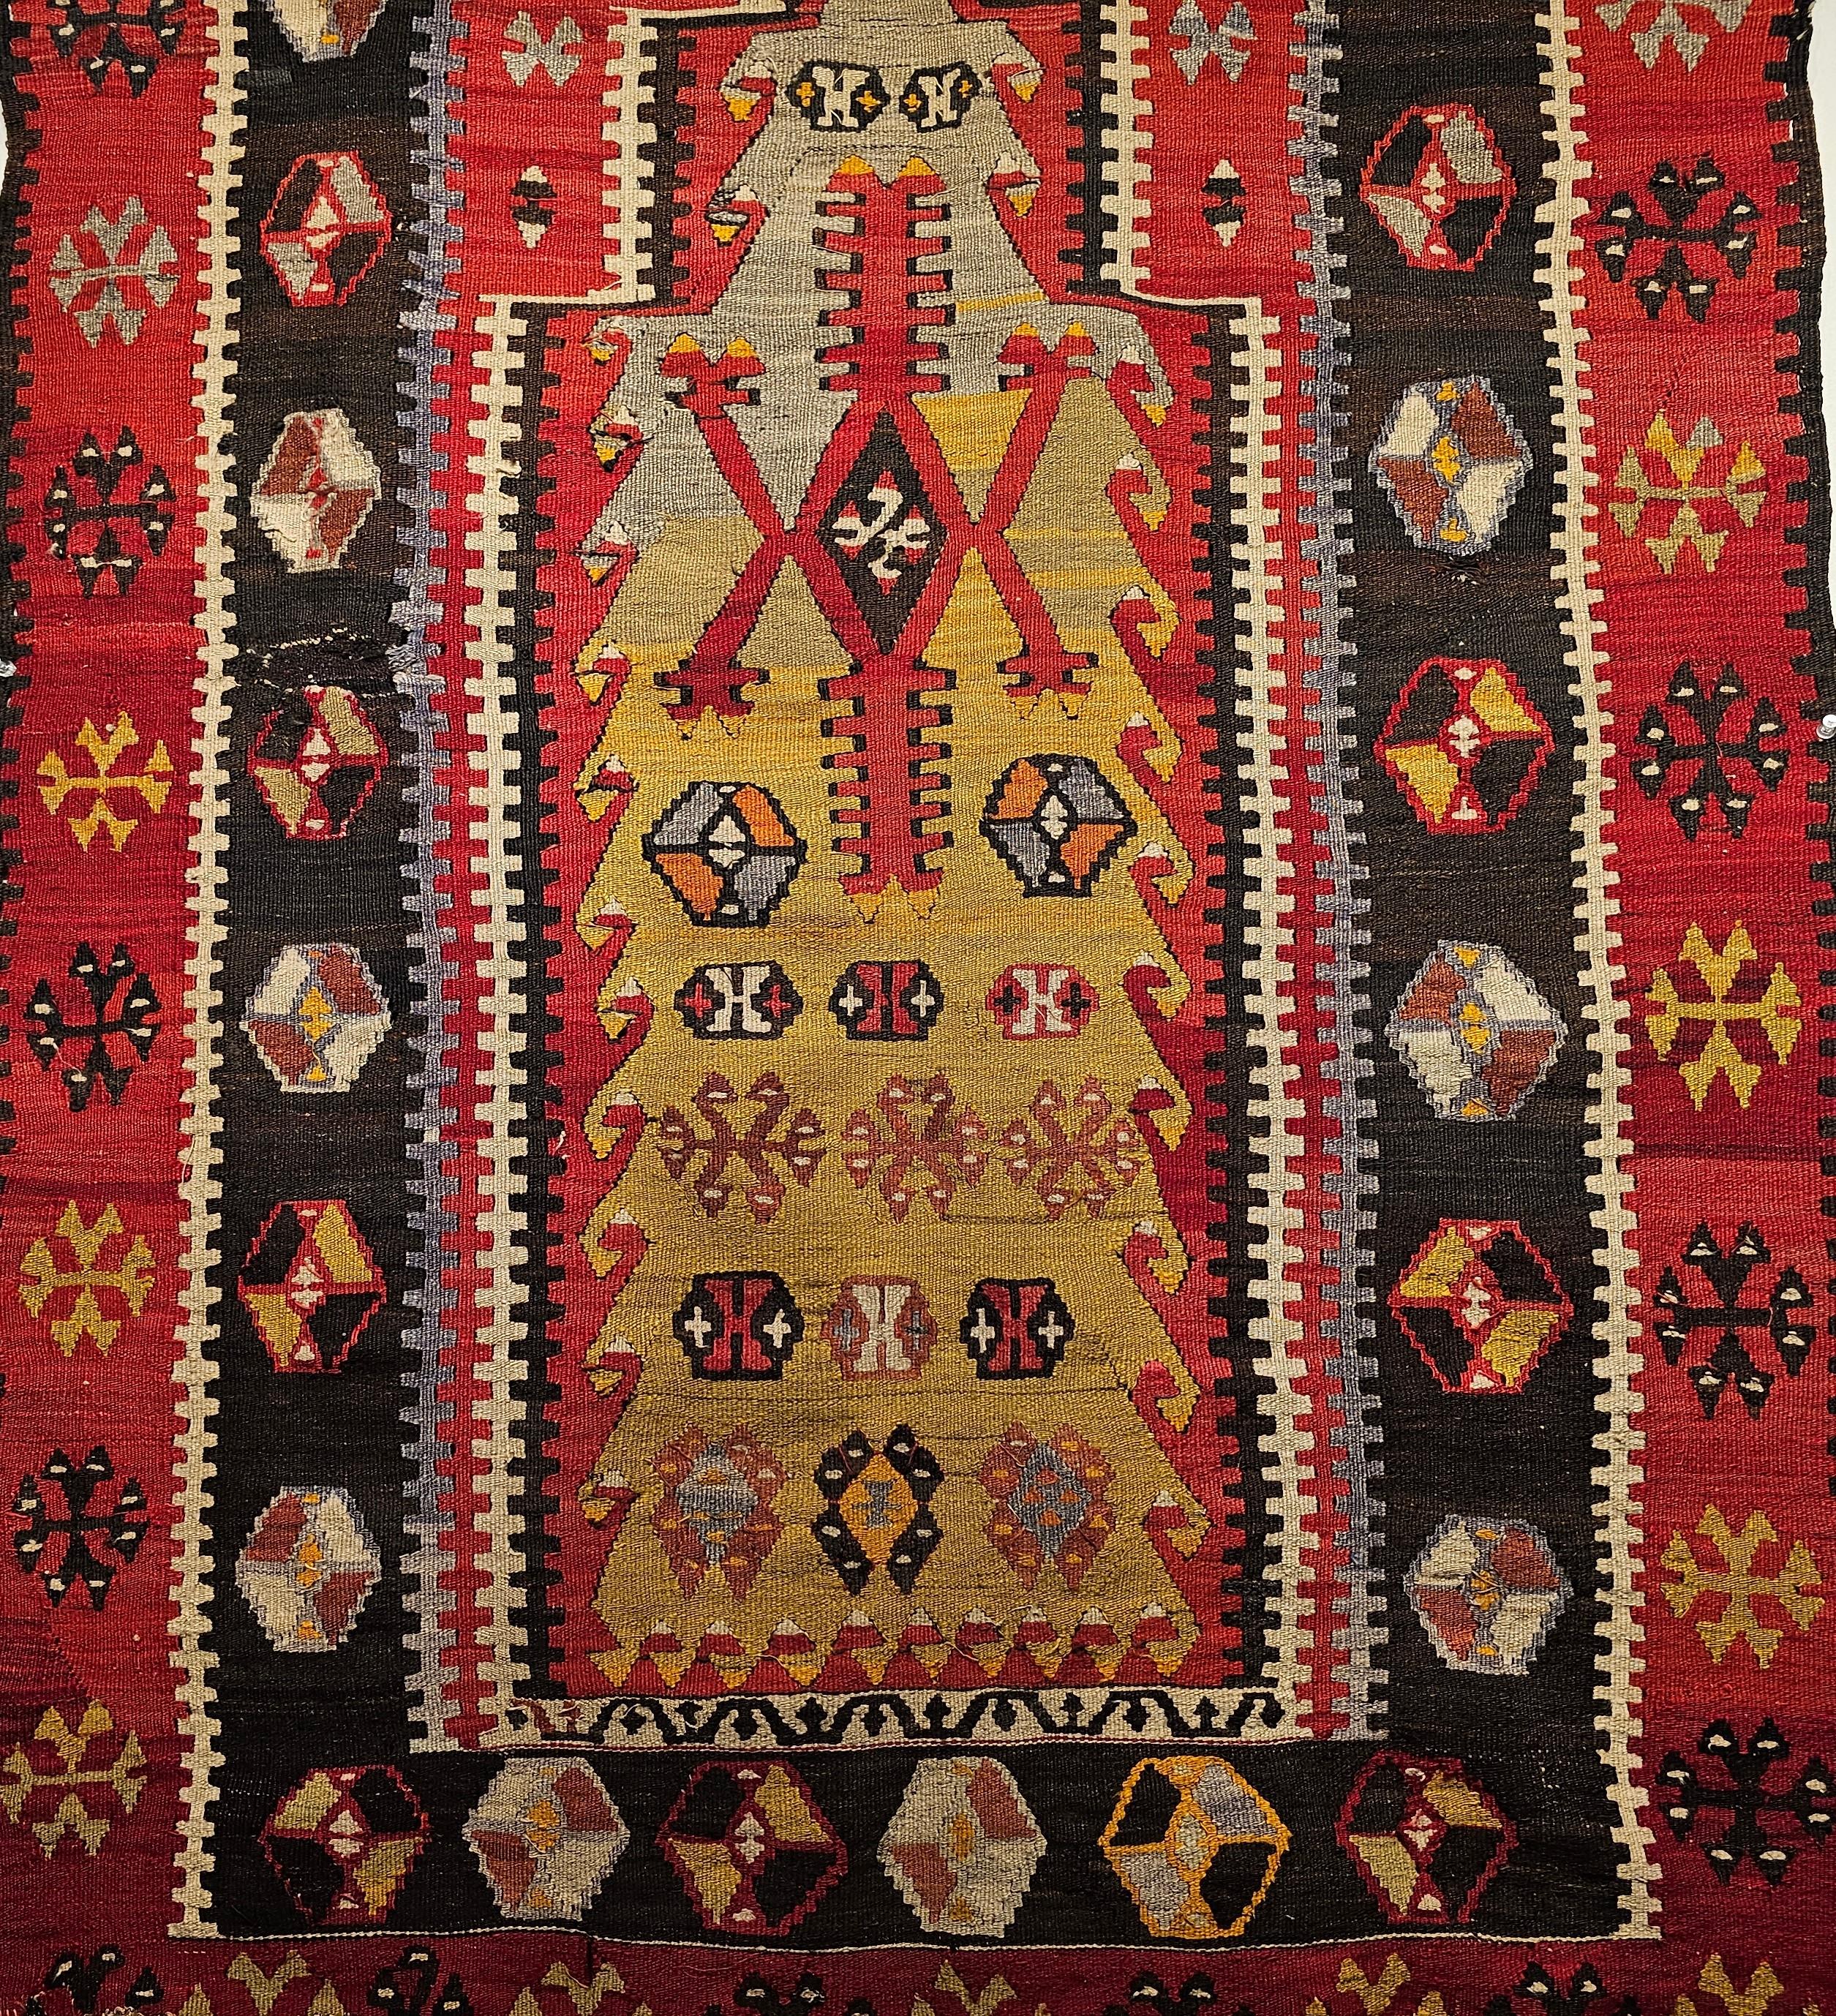 A beautiful Anatolian Kilim in prayer rug pattern from the early 1900s in abrash green, yellow, red, and black colors. The beautiful green in the Mihrab (prayer niche) design of this antique Turkish Kilim adds to the uniqueness of this small antique